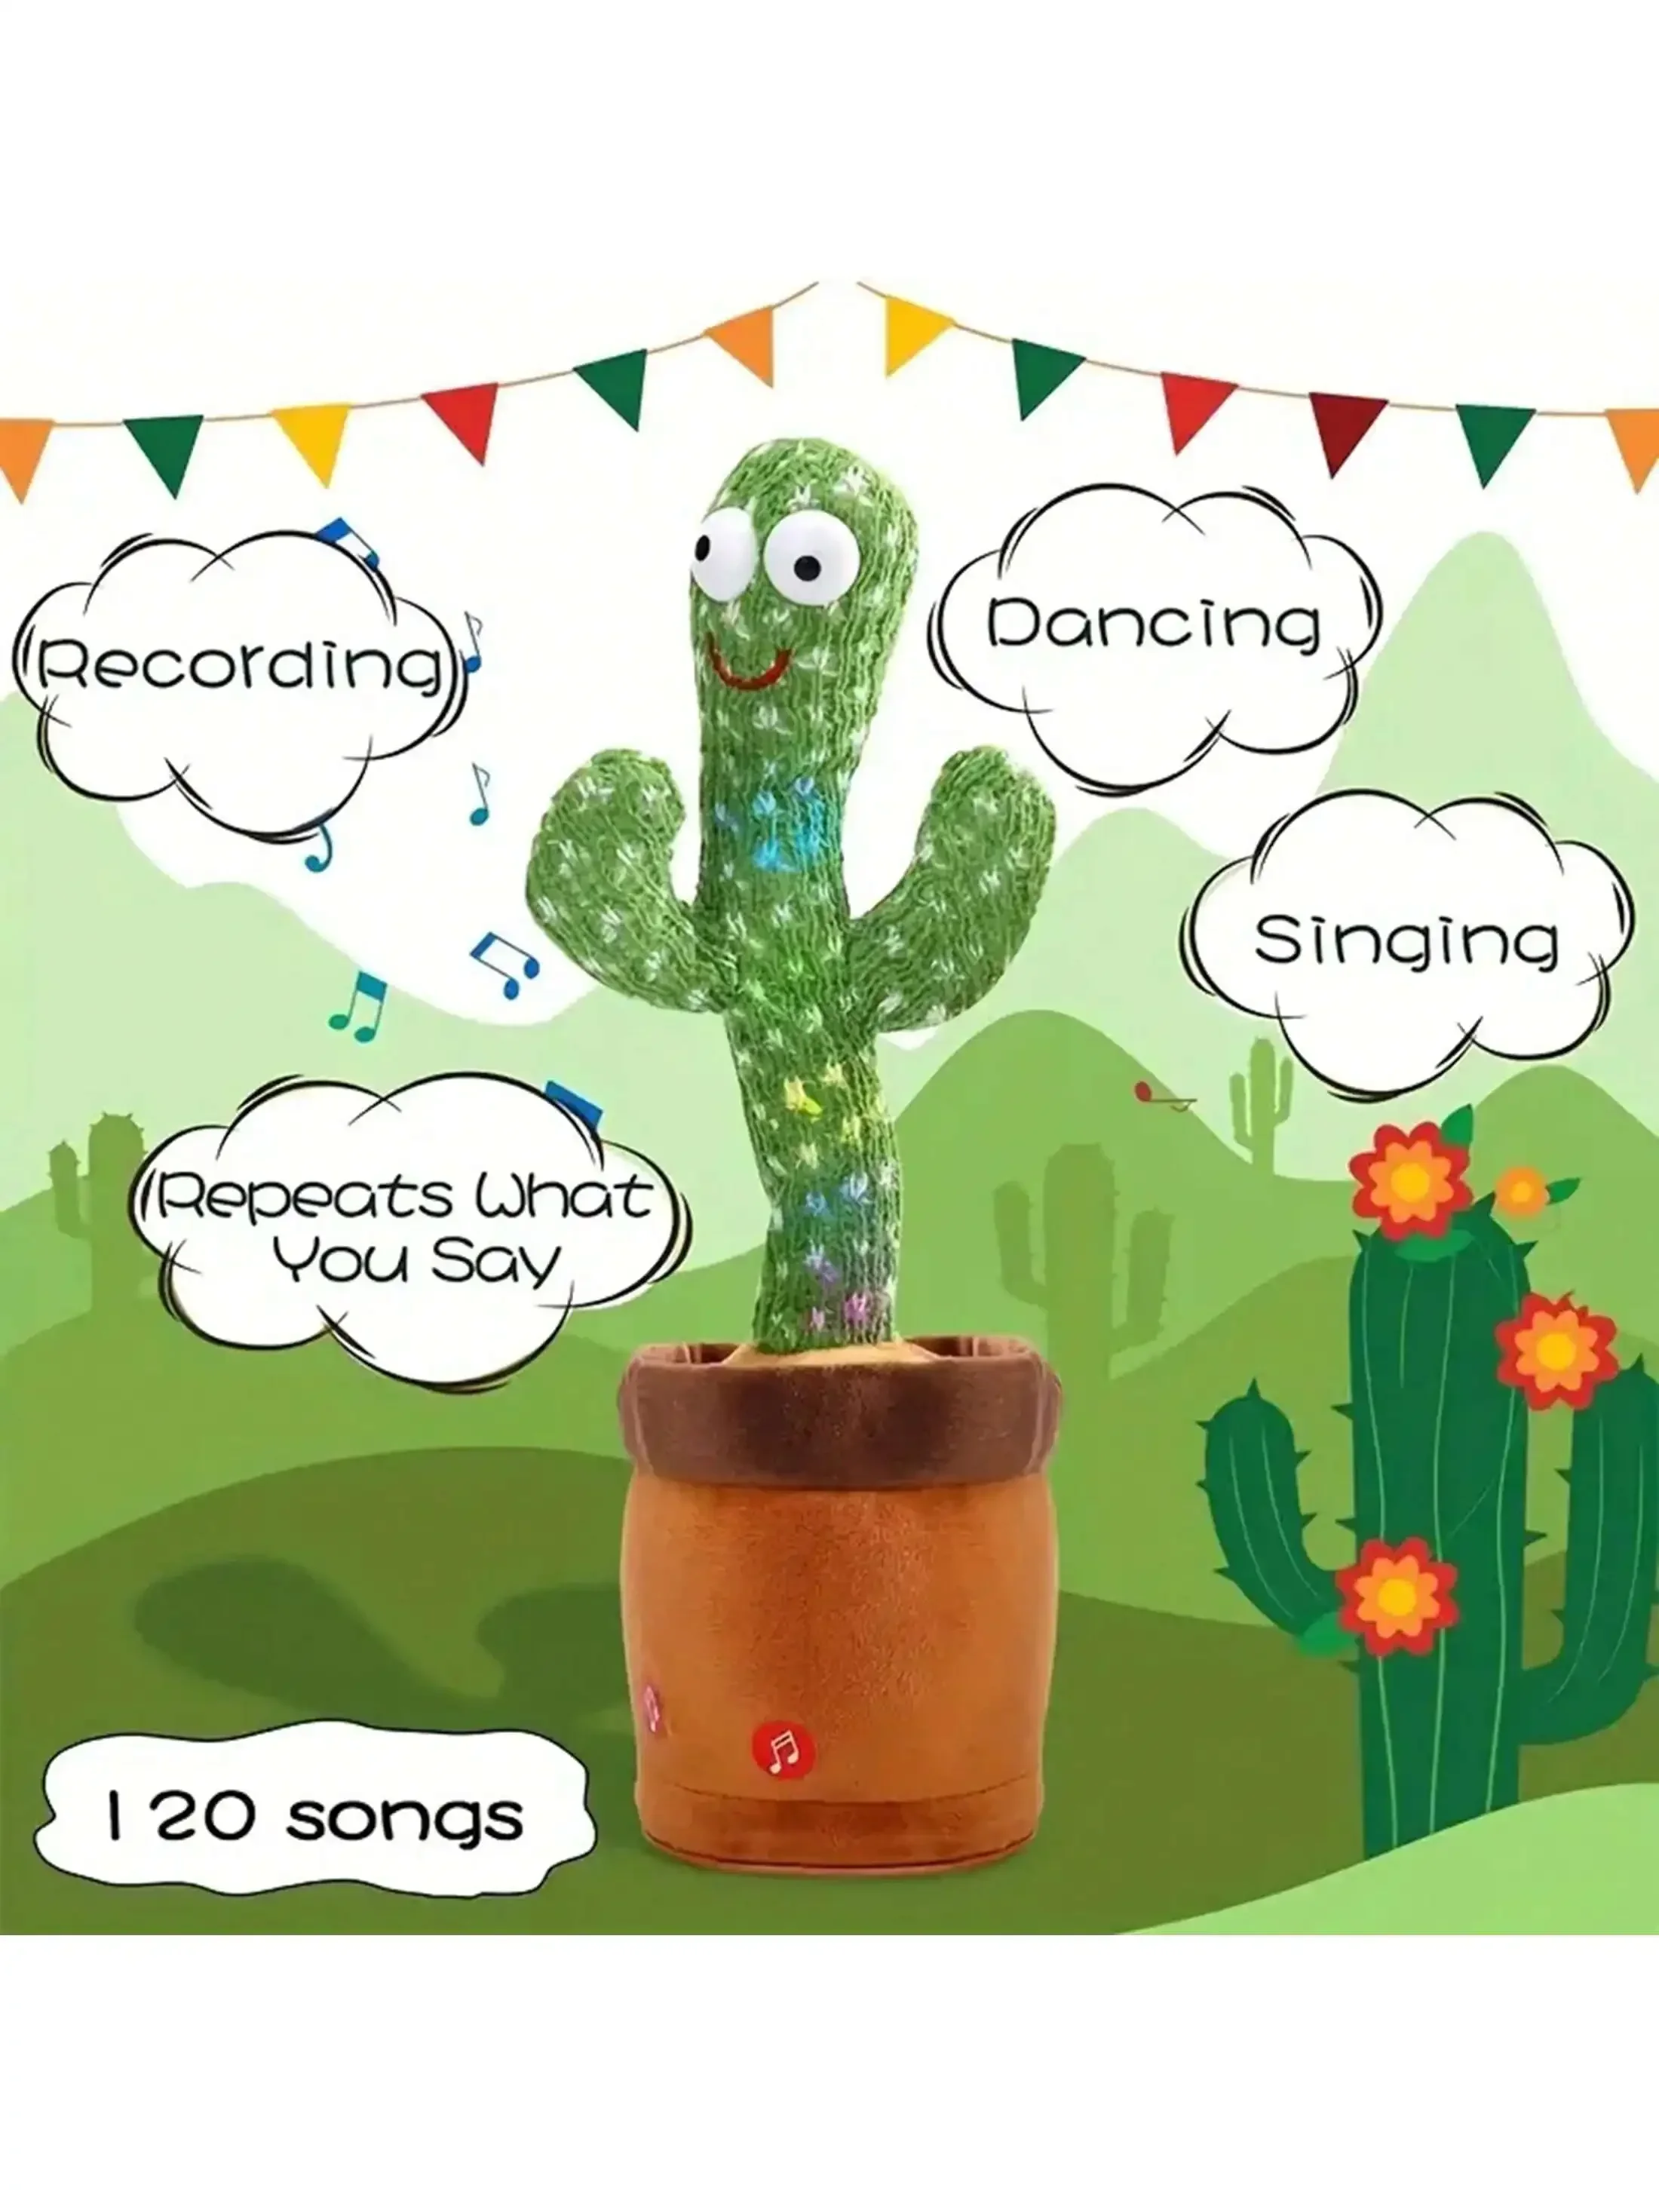 Dancer Cactus With Sound In Spanish Captus Dancer For Babies USB Dancing Cactus  Parlant Toy Russian - AliExpress